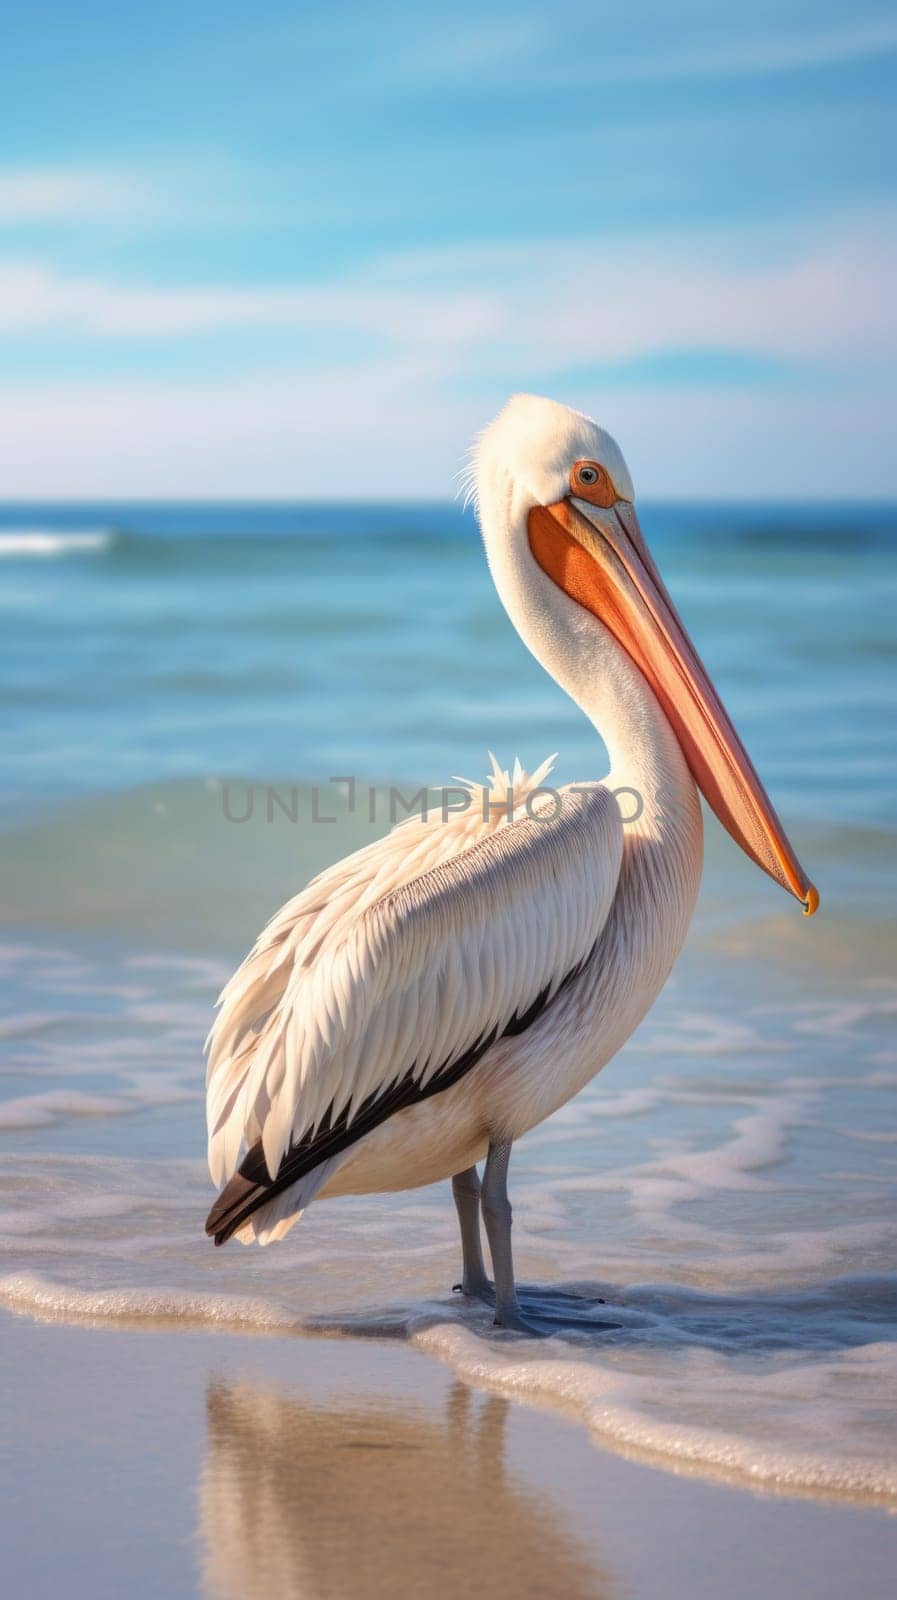 A pelican standing on the beach with its beak open